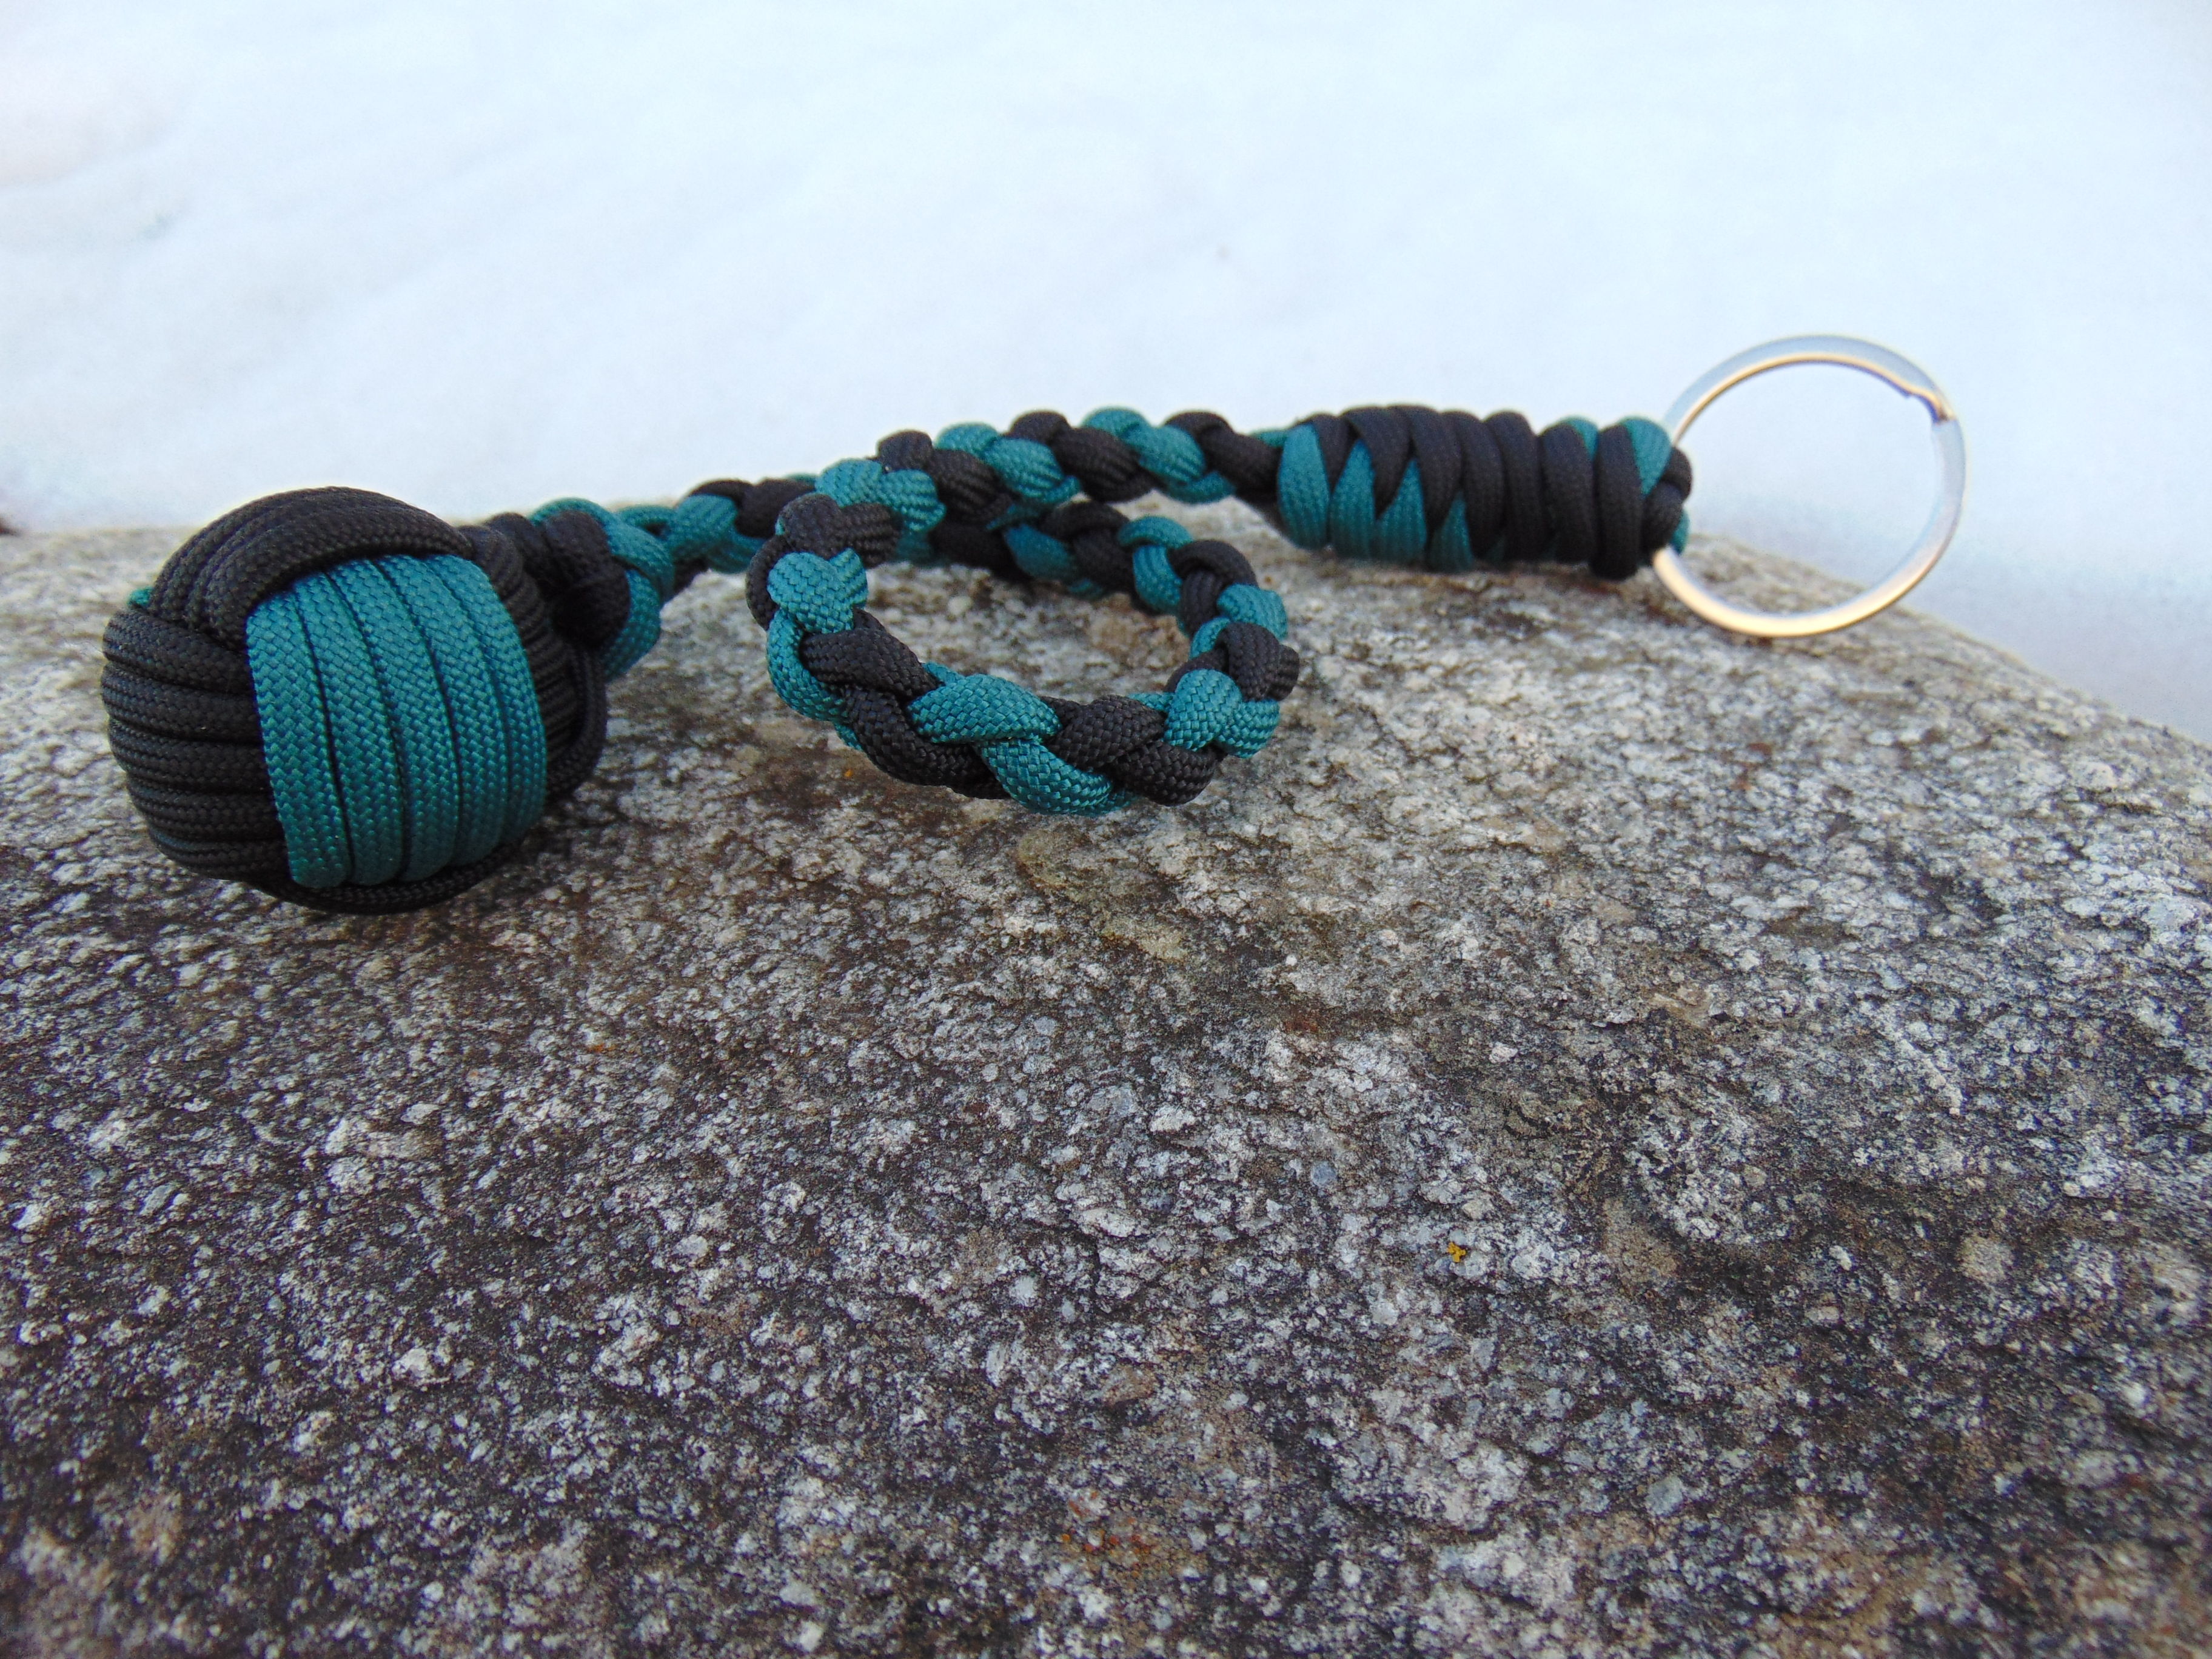 Details about   Paracord Monkey Fist Keychain With 1" Steel Bearing Green & Black Pattern/ Green 